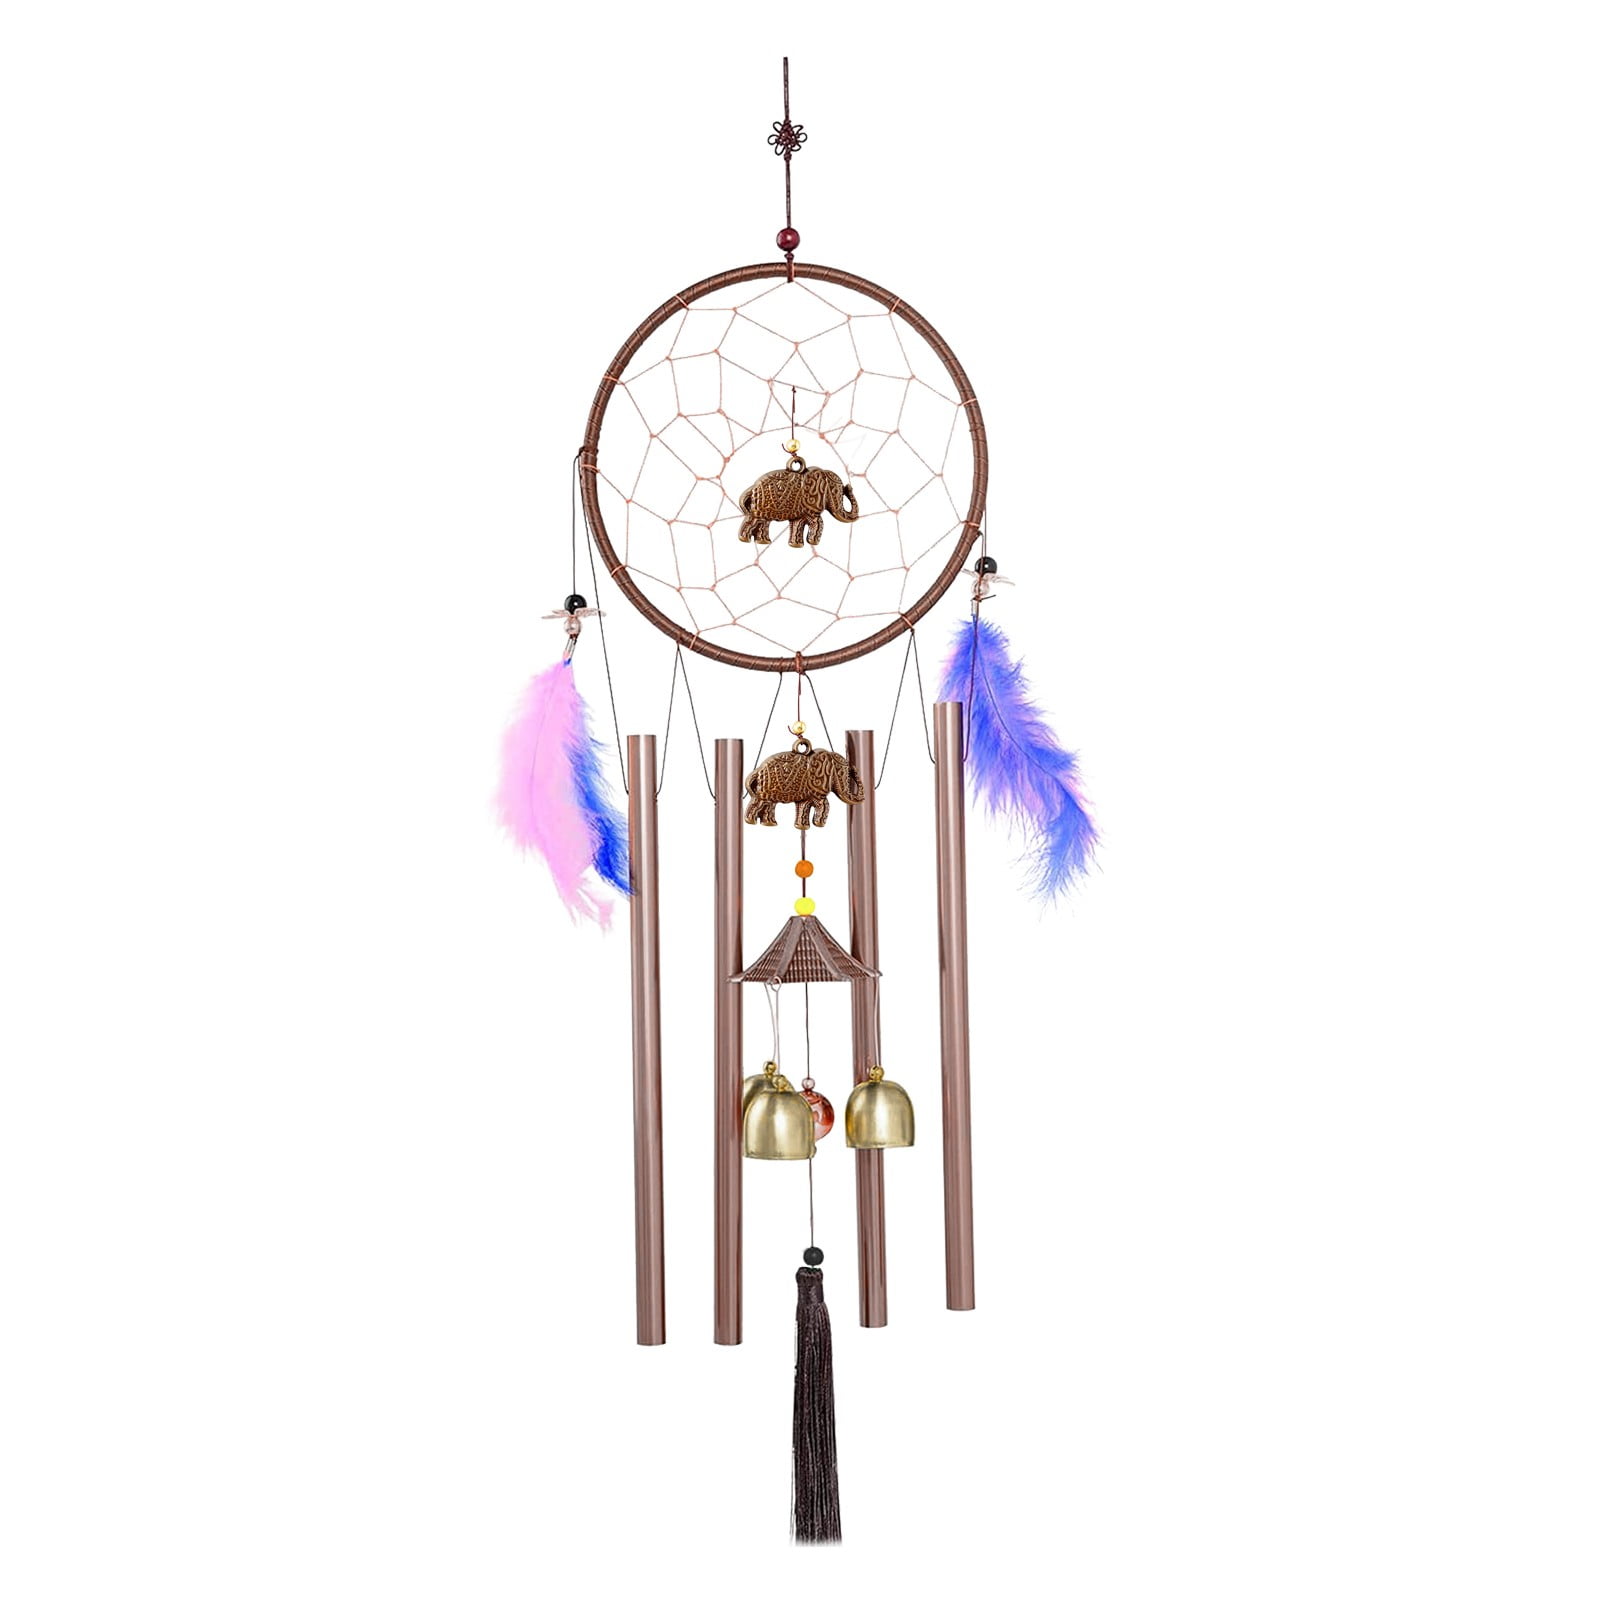 MVNSFEW Heart Dream-catcher Wind Chimes Garden Gifts Gifts for Family ...